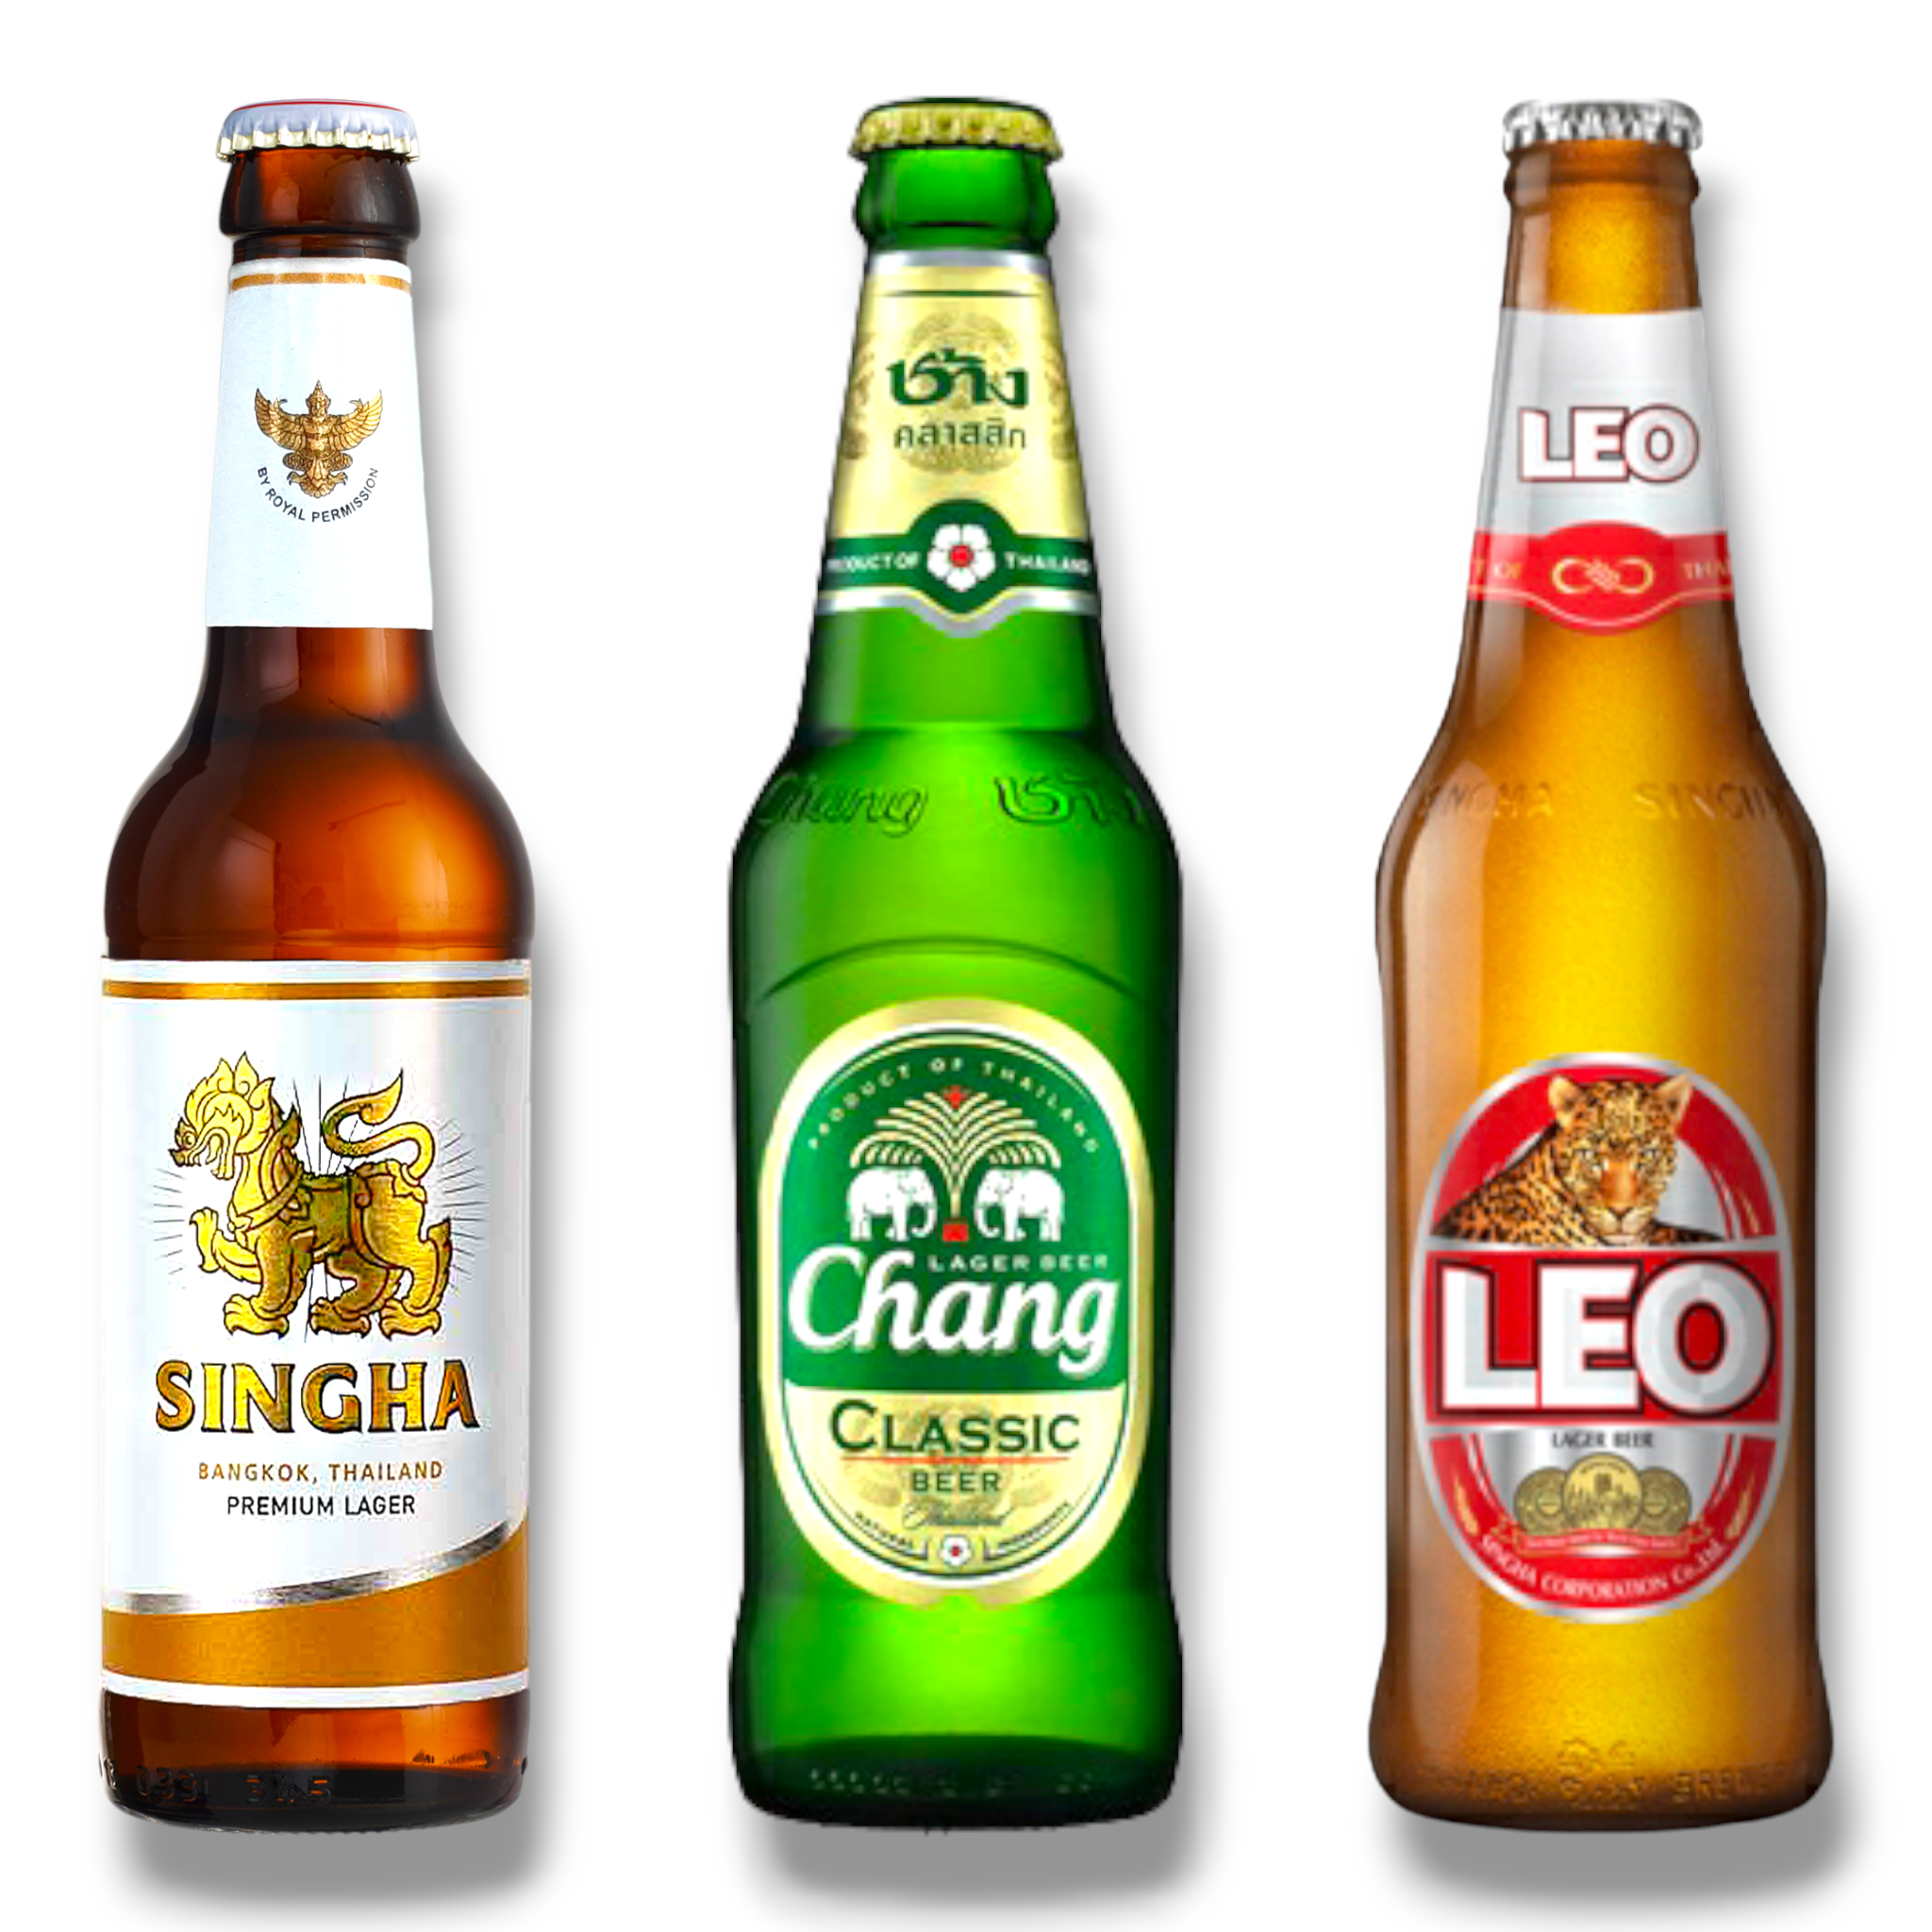 Entdecke Thailand - Singha Premium Lager, Chang Classic & Leo Lager Beer